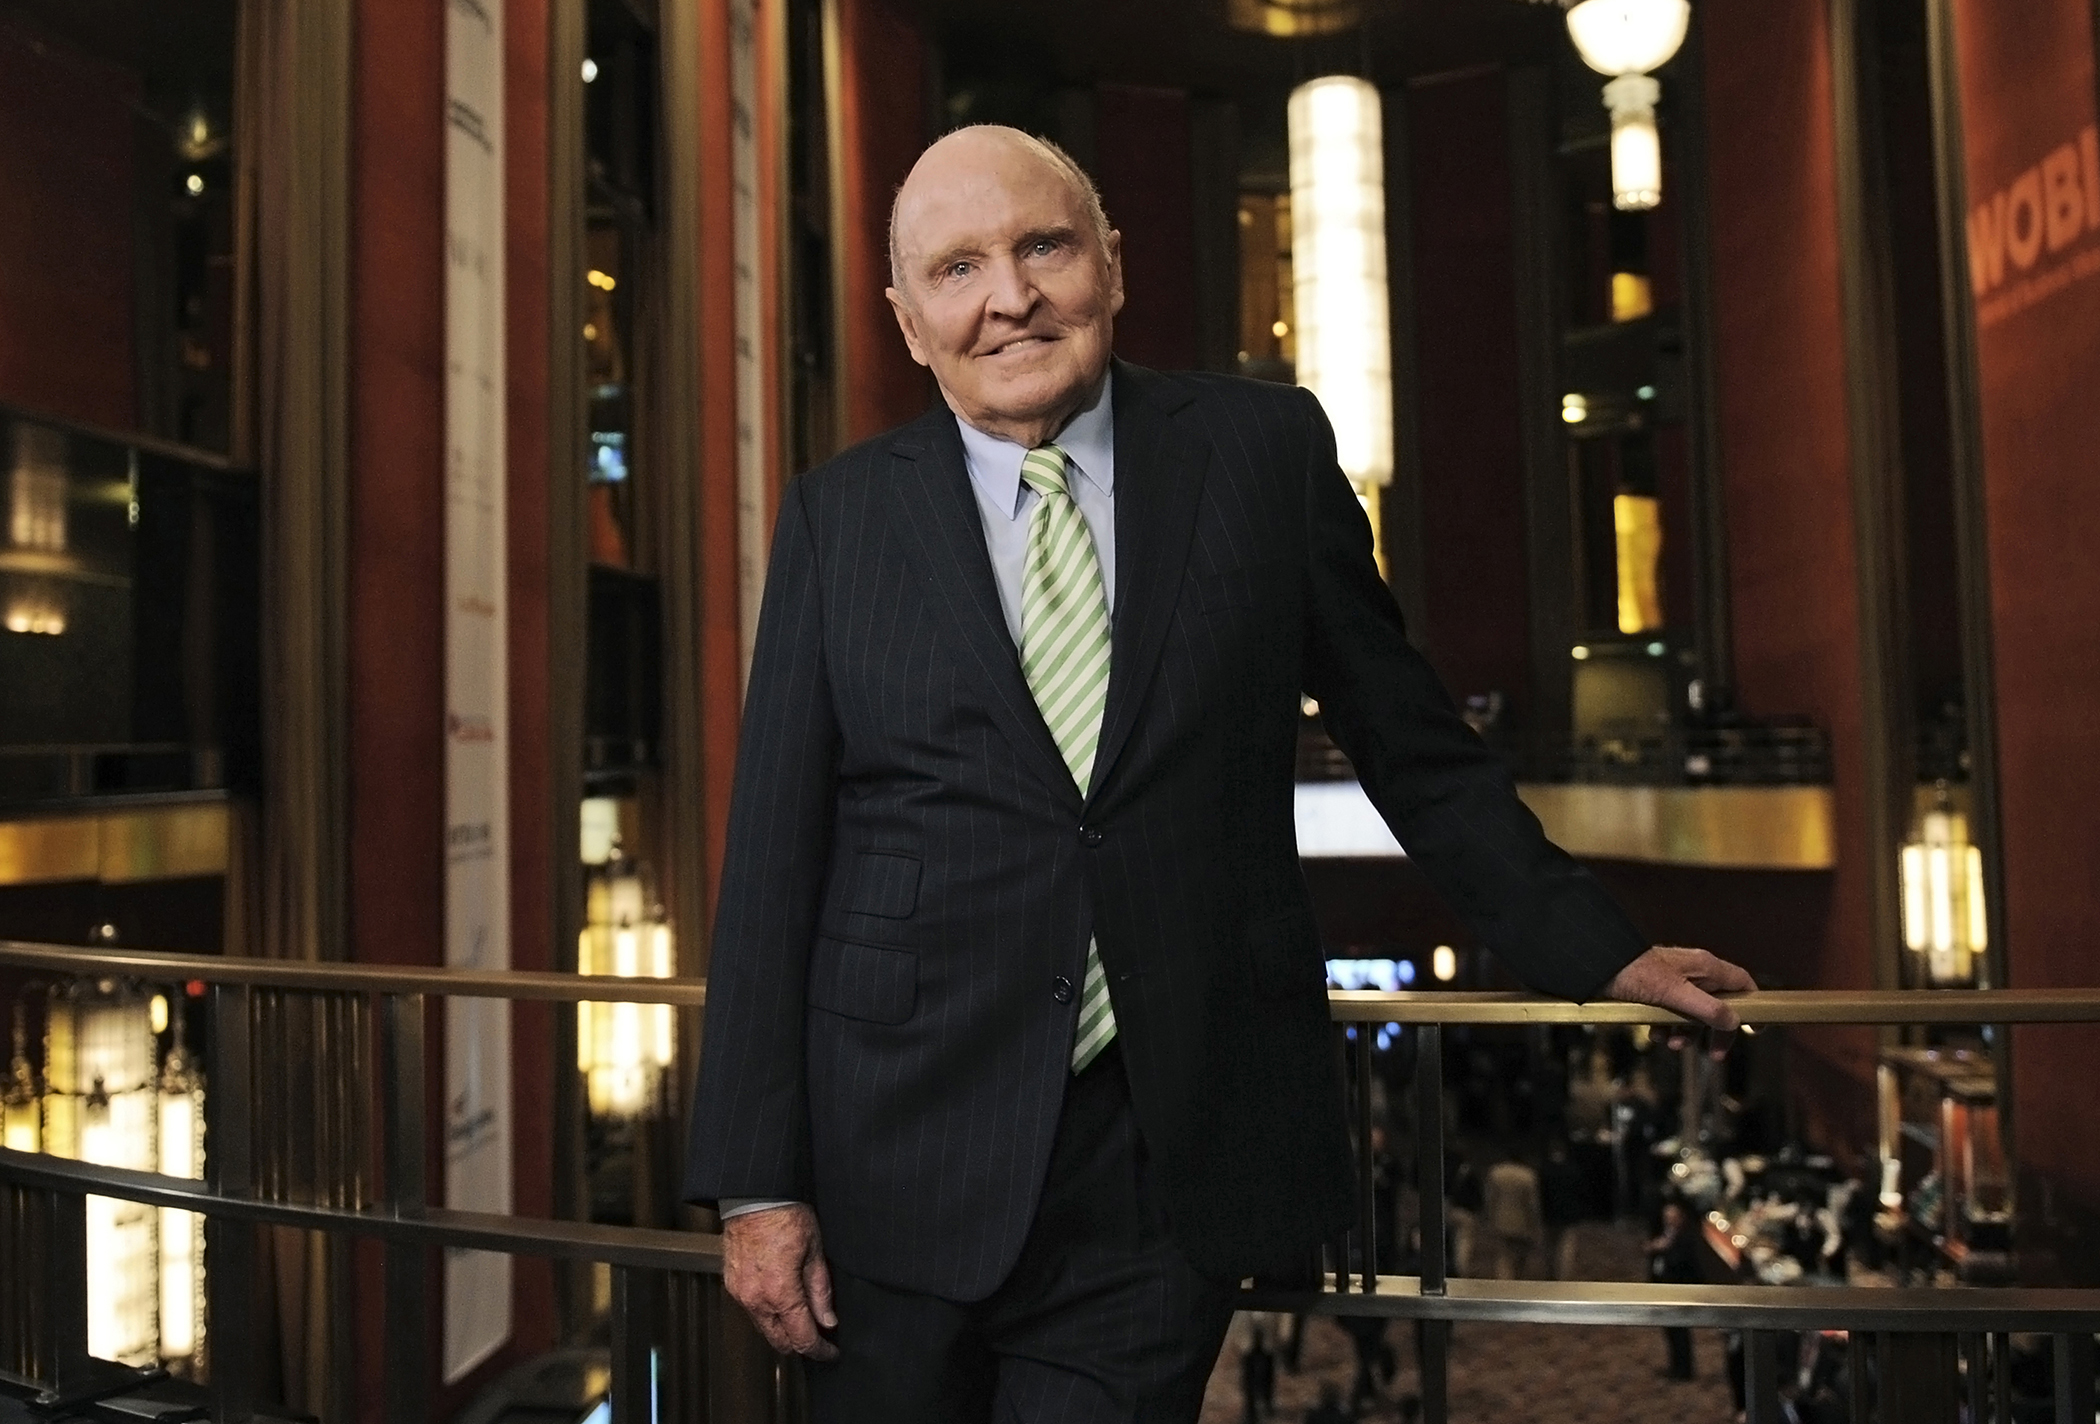 Jack Welch, former chief executive officer of General Electric Co., stands for a photograph at the World Business Forum in New York, on Oct. 2, 2013.